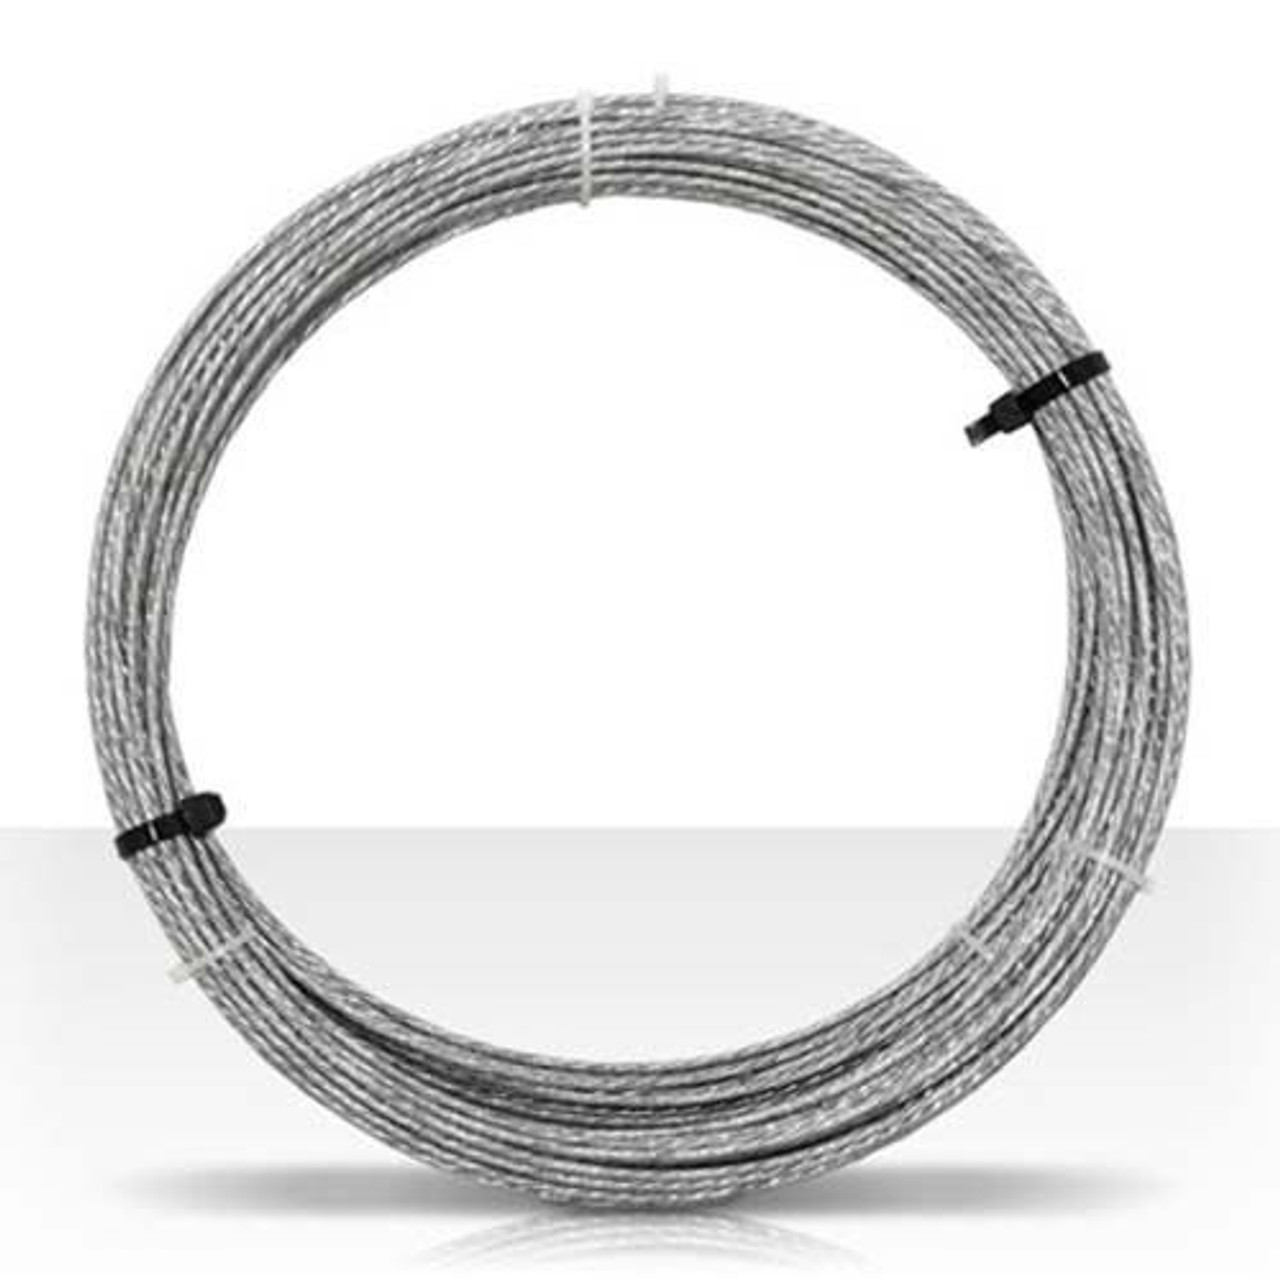 Channel Master CM-3084 Guy Wire 100' FT 20 GA 6 Strand Mast Antenna Support Cable 20 Gauge Guy Wire Cable Support Off-Air Aerial Mast Pipe Roof Mount, Part # CM3084